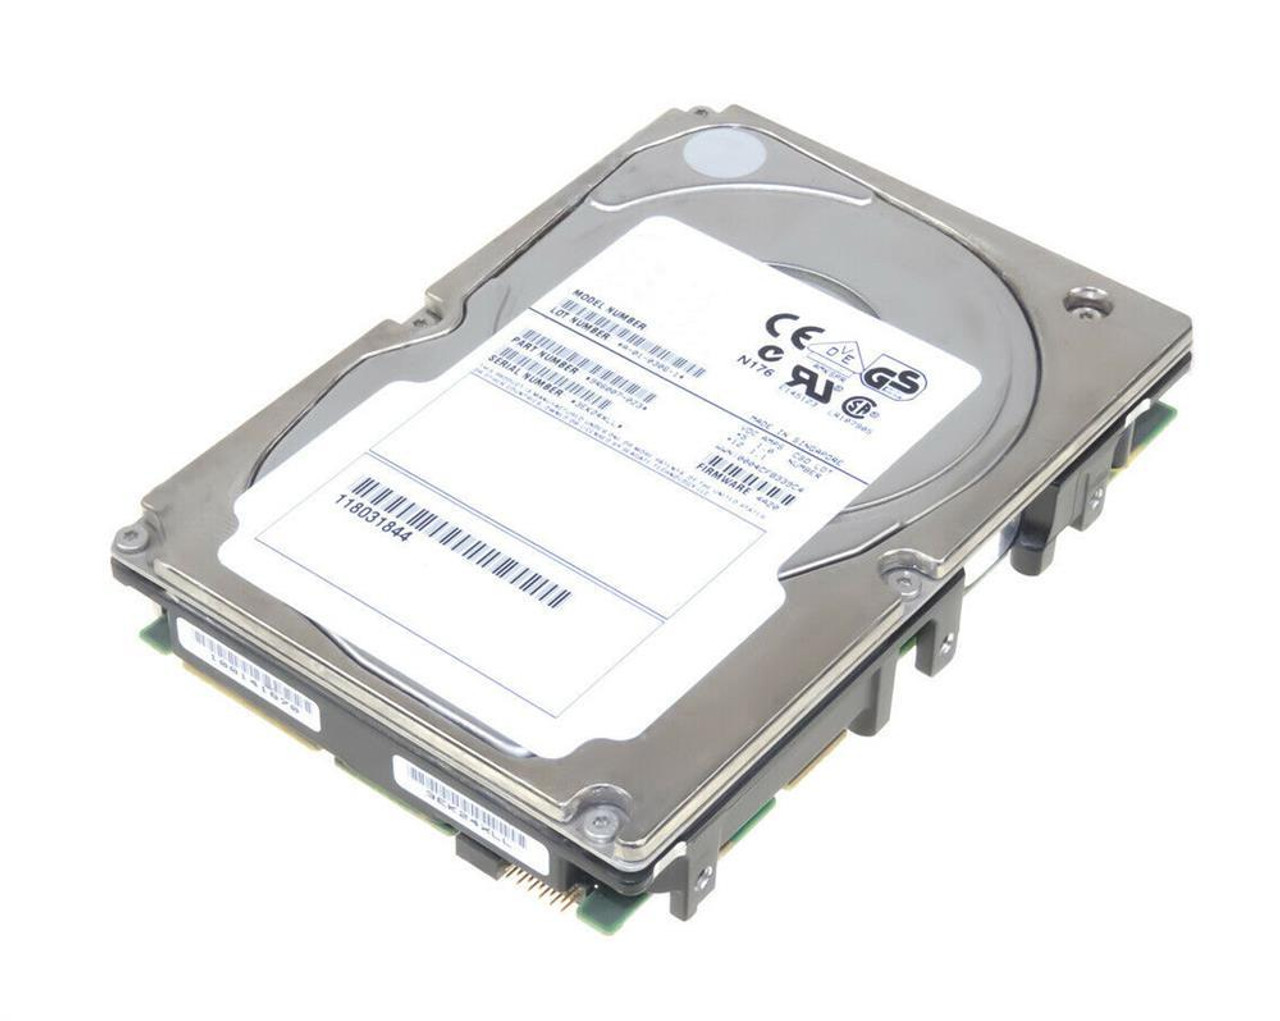 118031844-A02 EMC 73GB 10000RPM Fibre Channel 2Gbps 16MB Cache 3.5-inch Internal Hard Drive for CLARiiON CX Series Storage Systems